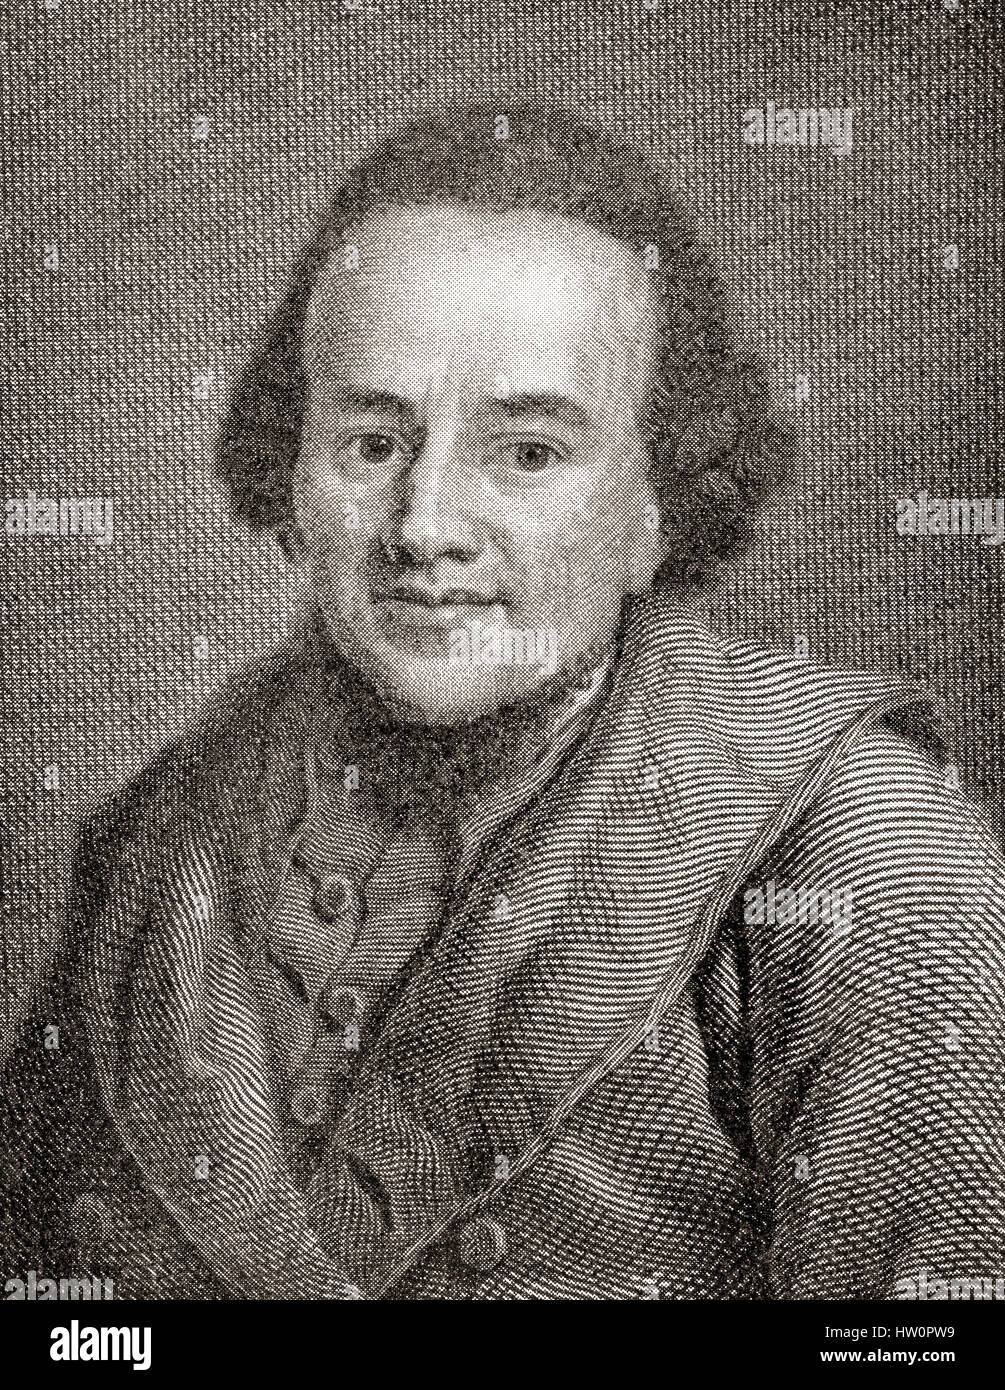 Moses Mendelssohn, 1729 - 1786.  German Jewish philosopher. From Hutchinson's History of the Nations, published 1915. Stock Photo